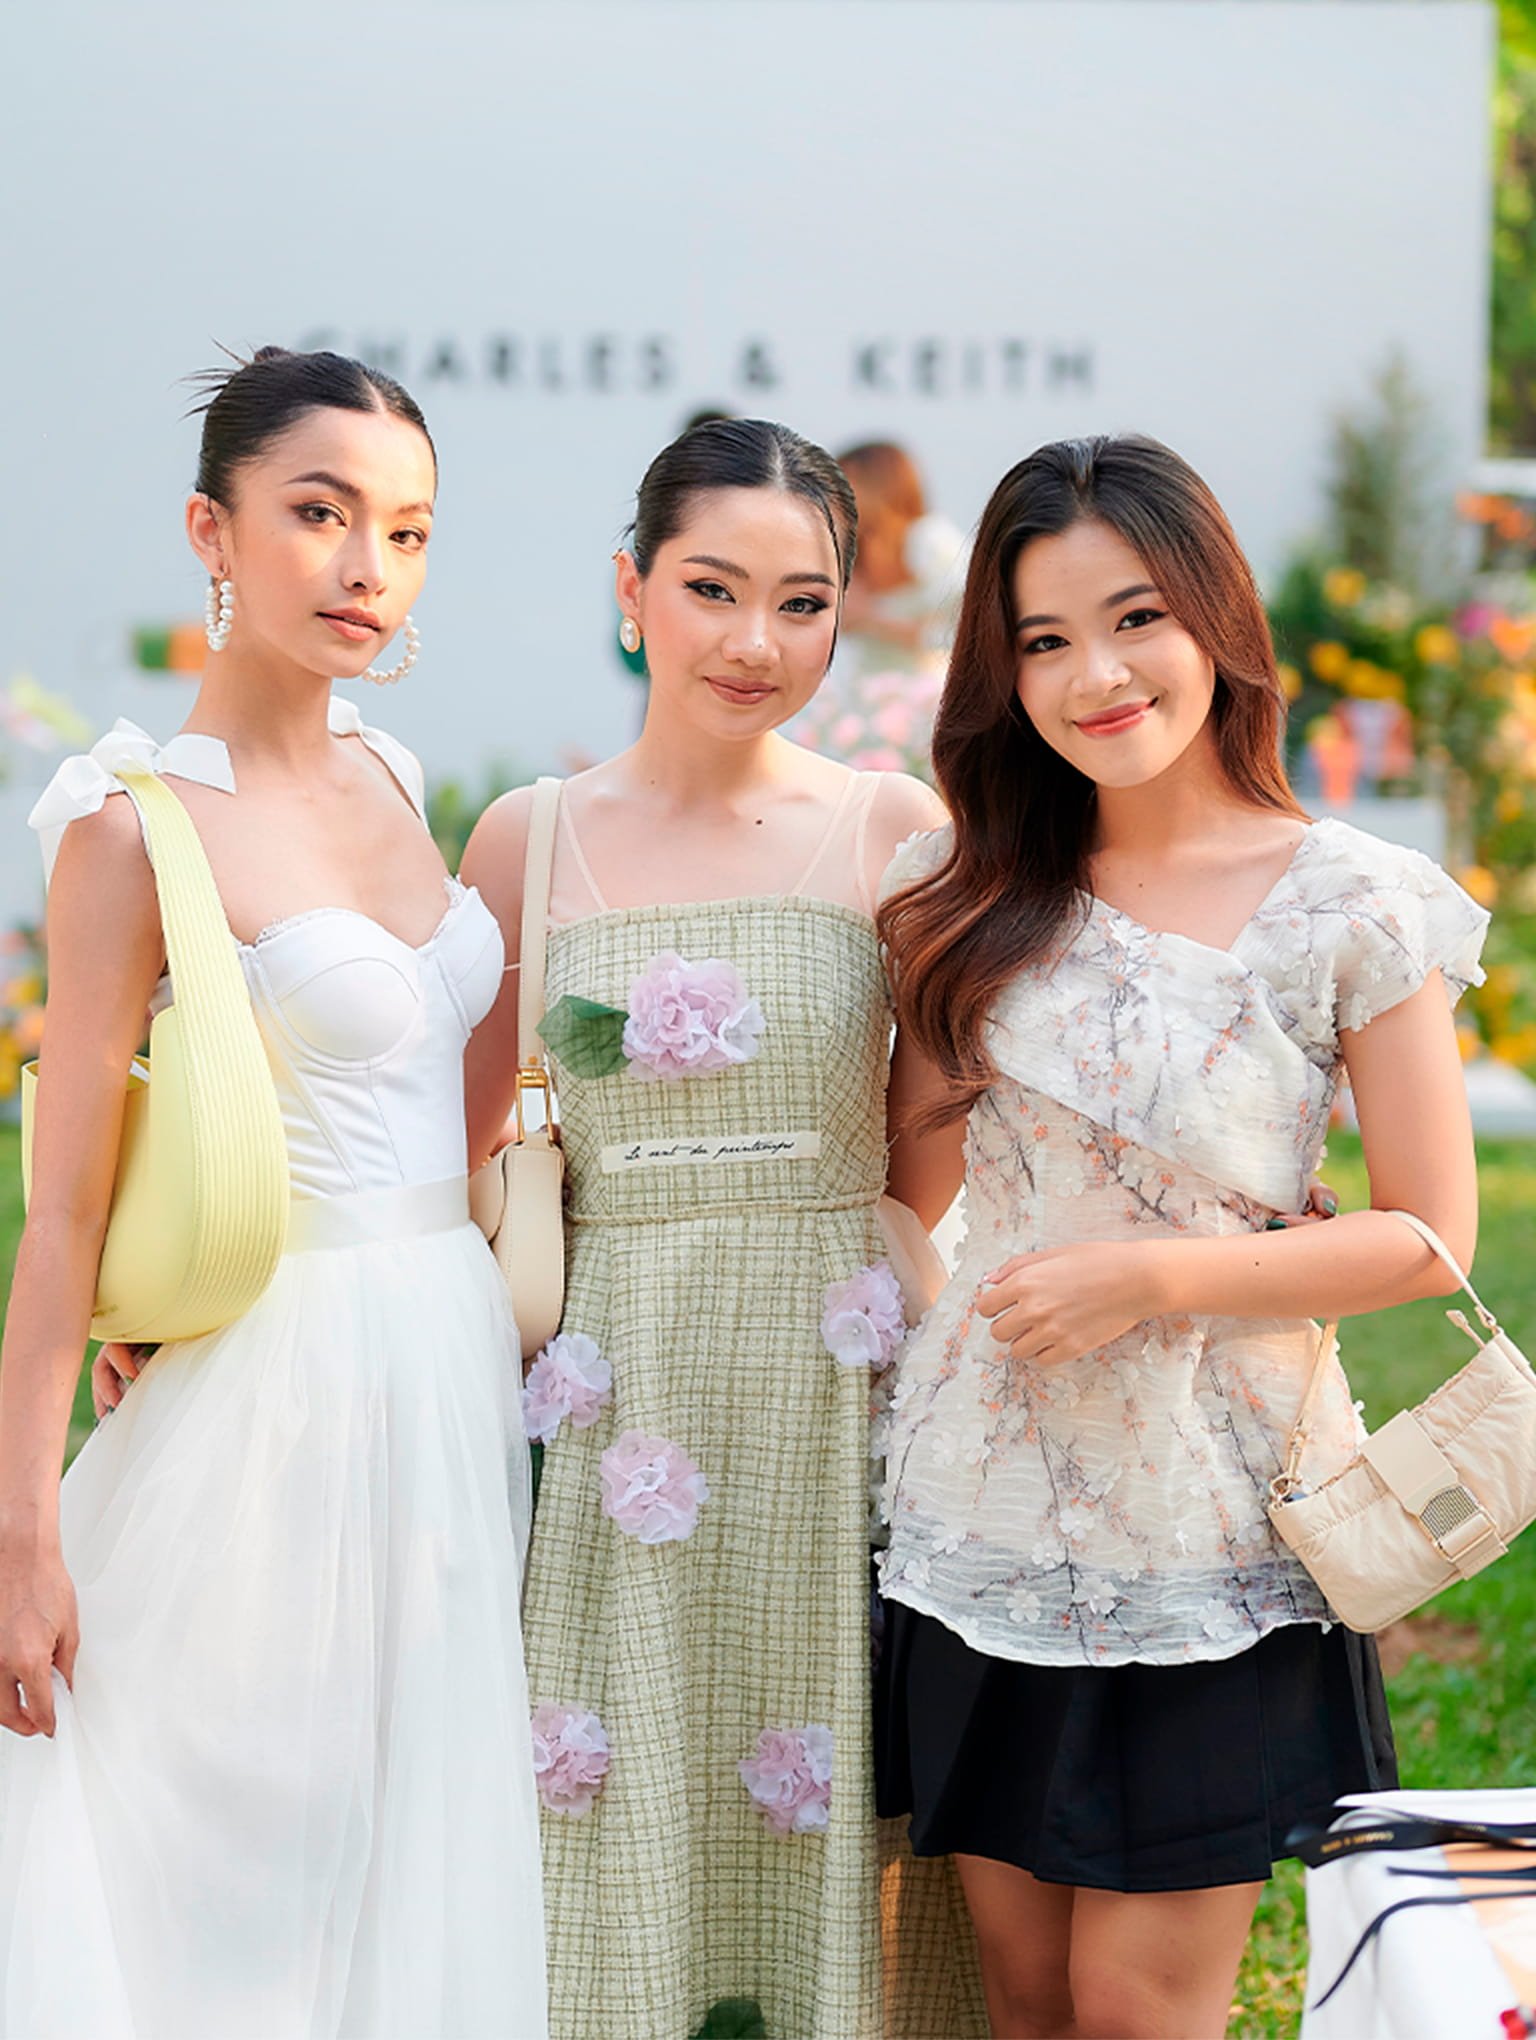 Daa Dao, Xiang and Sarajune attend the CHARLES & KEITH ‘Blooming Spring’ event in Phnom Penh, Cambodia